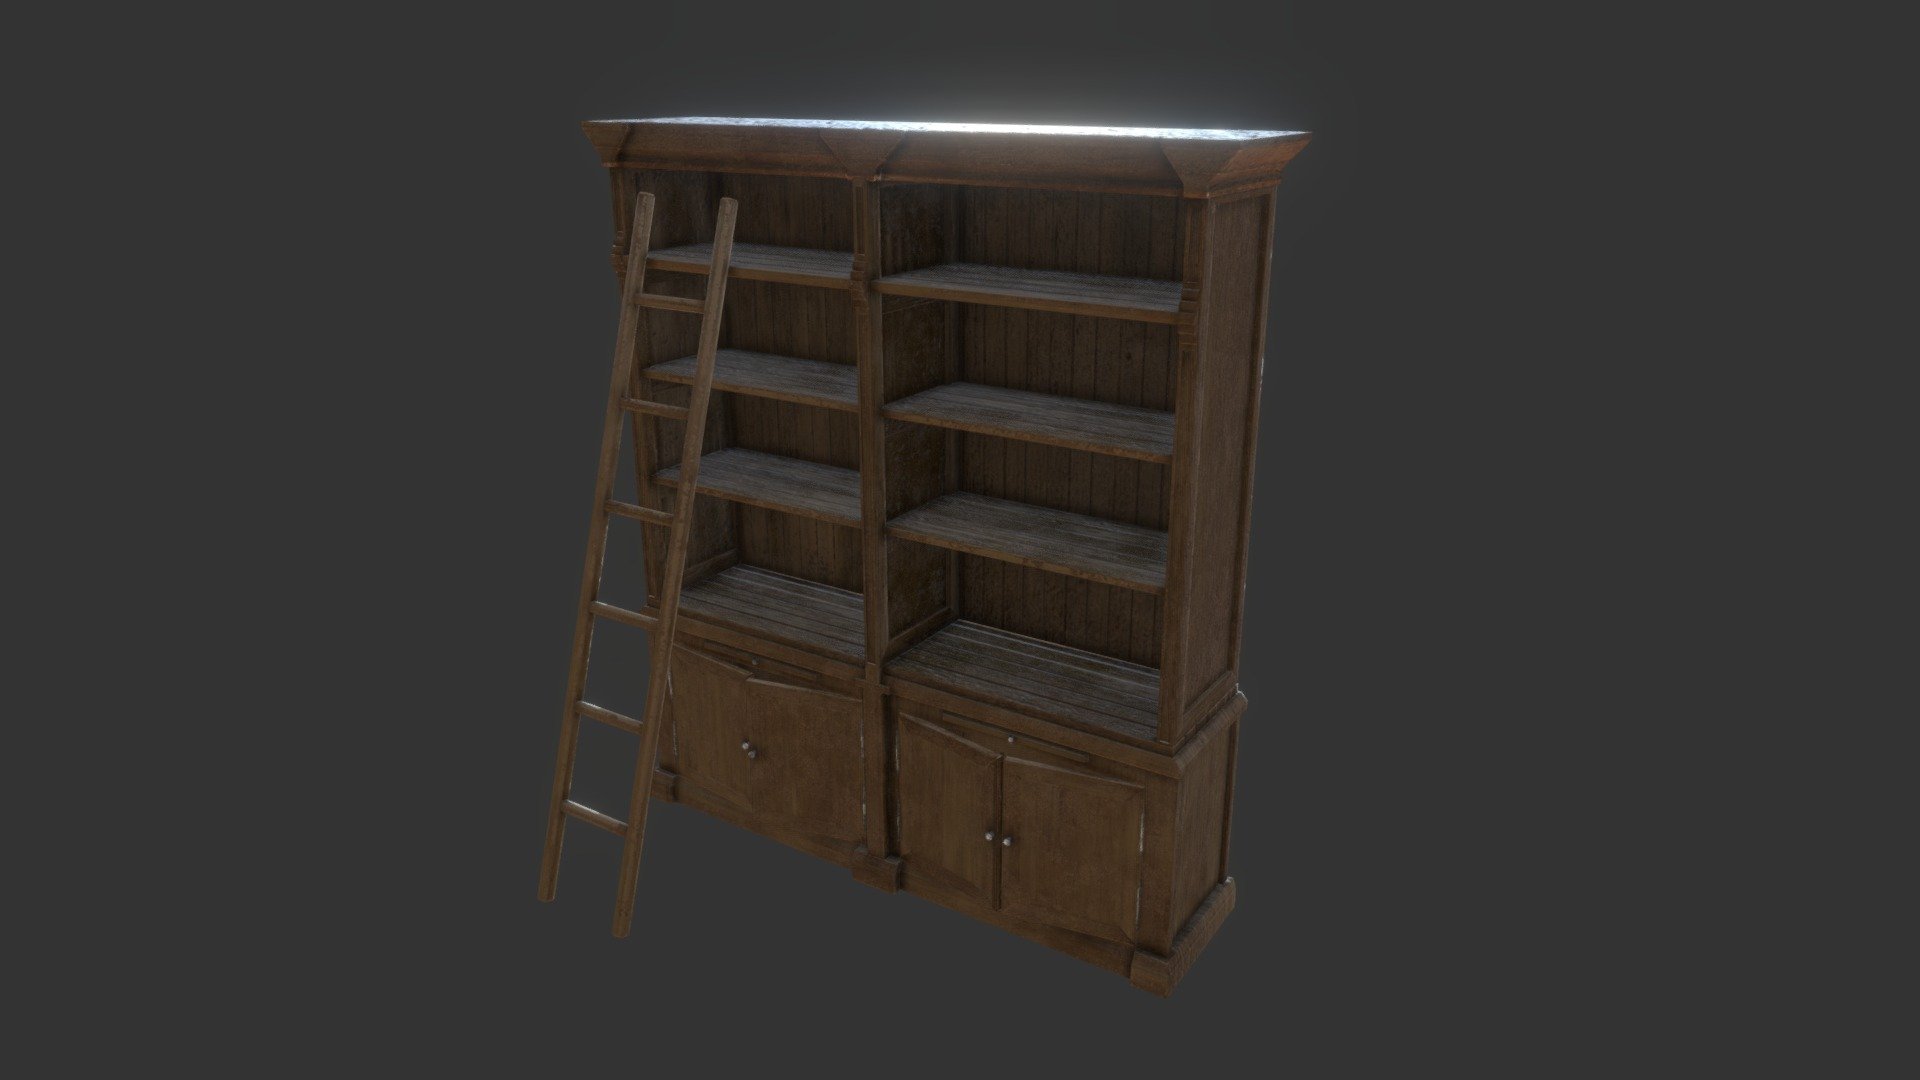 A vintage reclaimed pine bookcase with ladder. Early 20th century but mimics woodworking techniques from early medieval English Oak pieces, whilst combining them with Victorian &amp; Neo-Roman stylings.
Asset Is game ready and additional texture sets are available for use in Ue4 and Unity 3d model